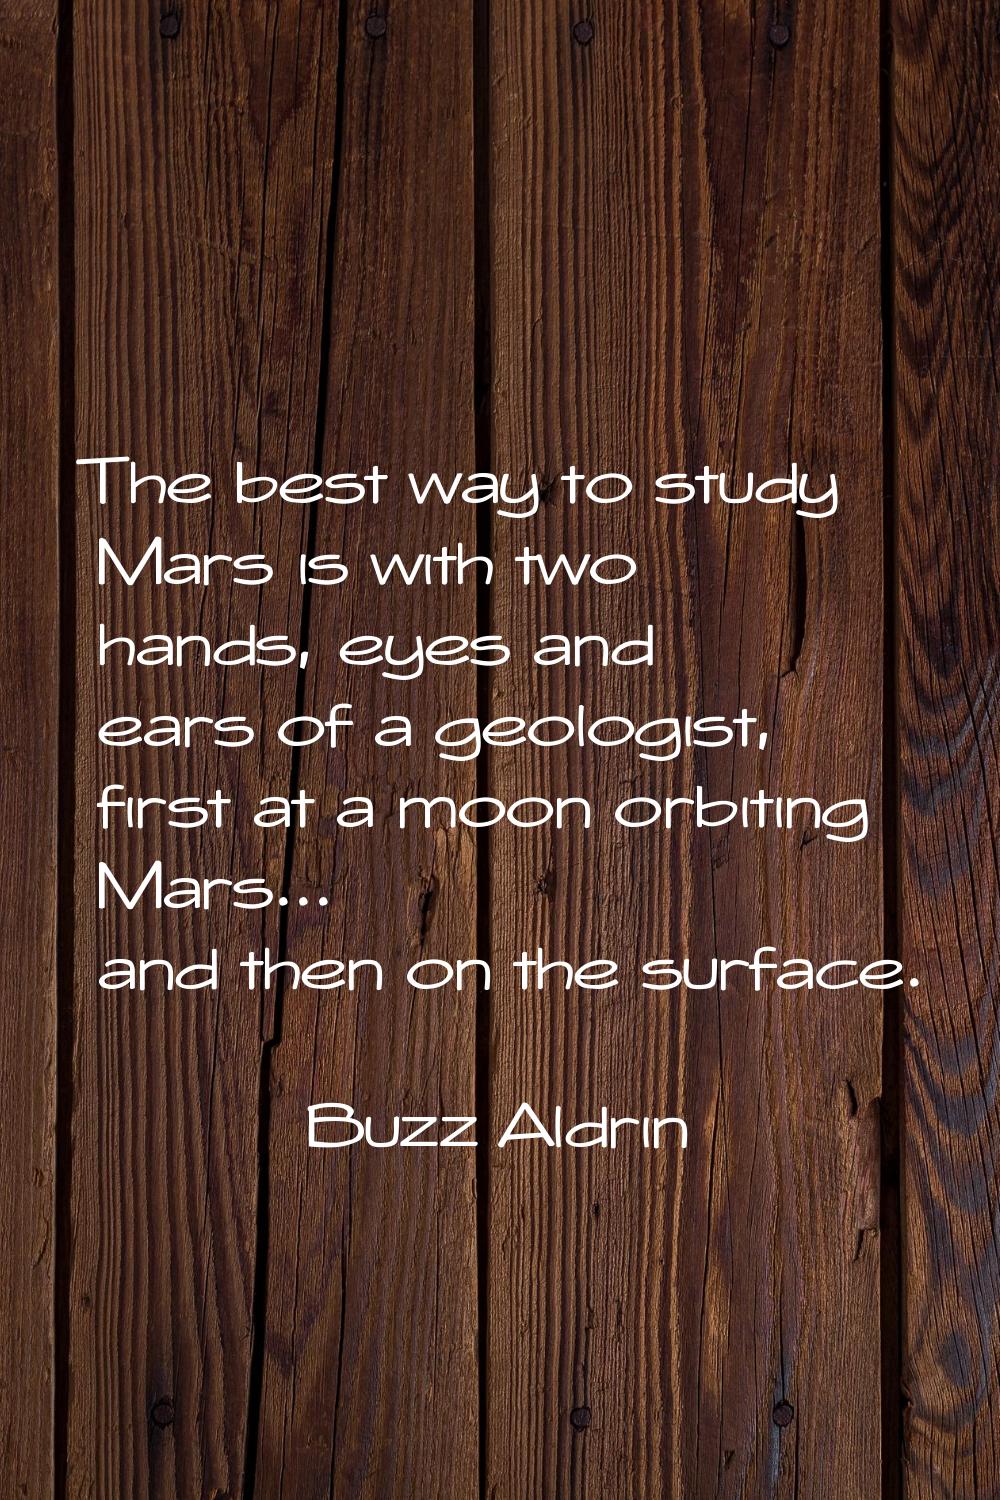 The best way to study Mars is with two hands, eyes and ears of a geologist, first at a moon orbitin